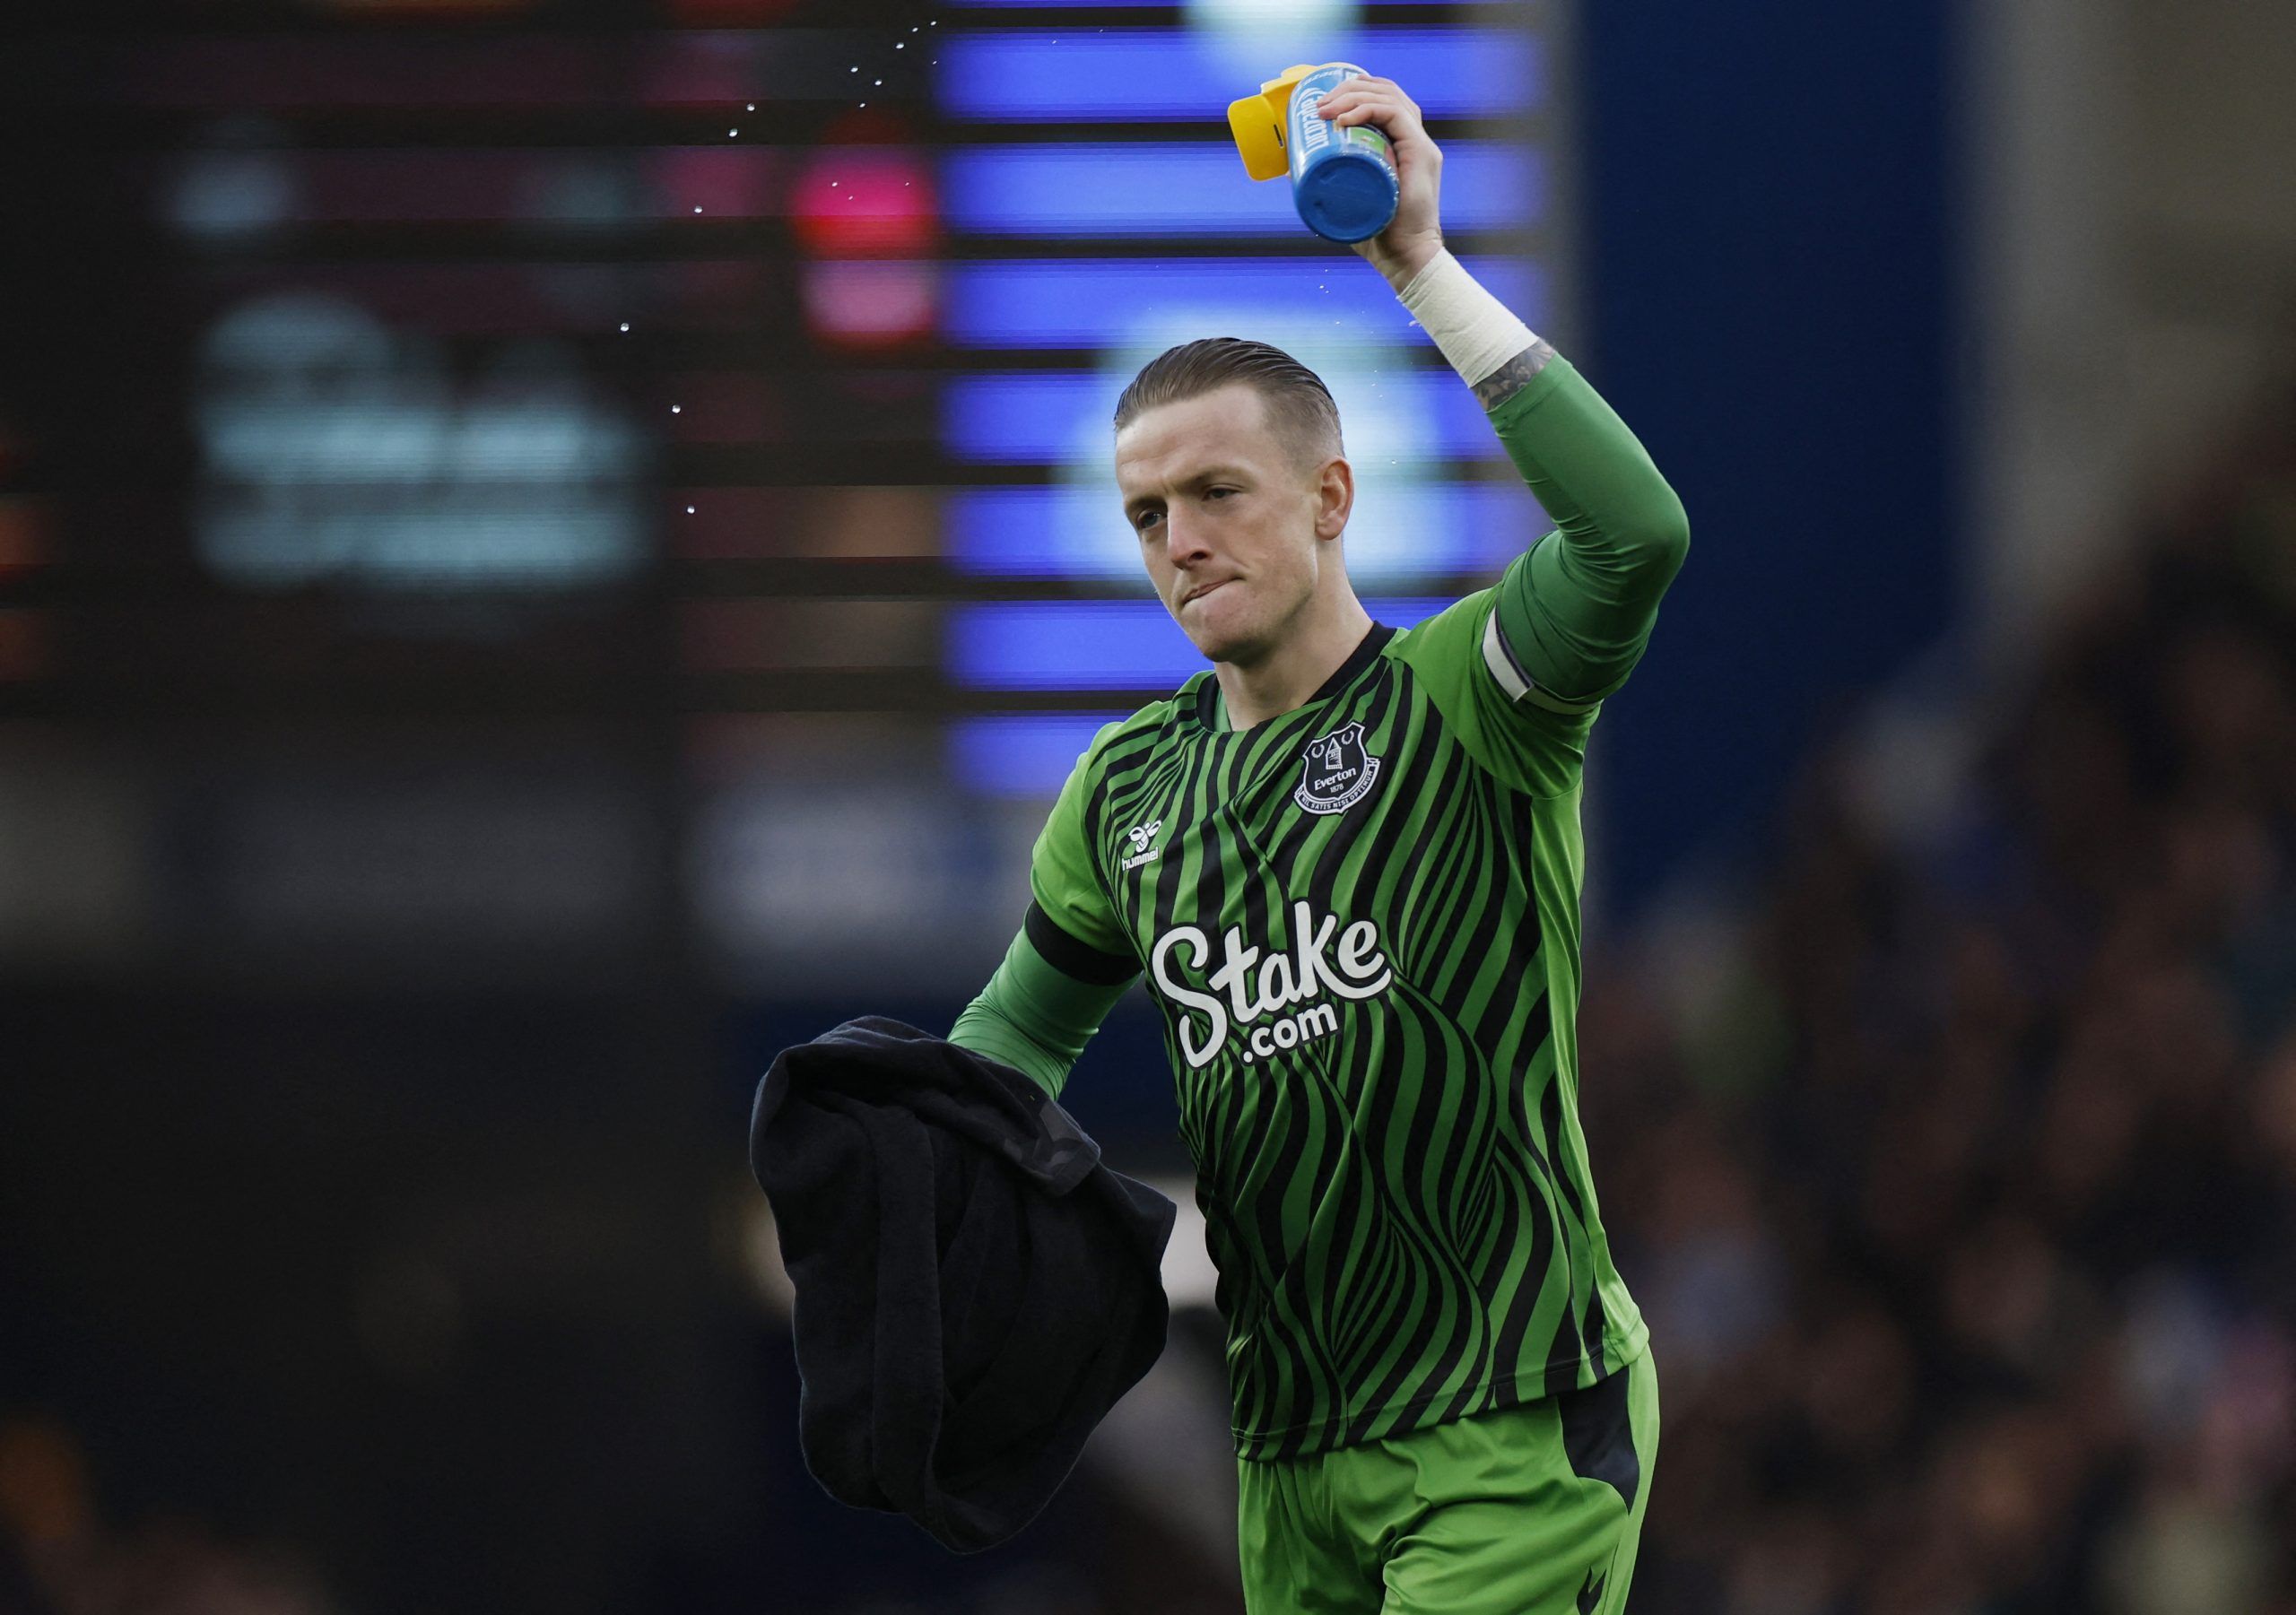 Everton: Toffees yet to sign off on new Jordan Pickford deal -Everton News